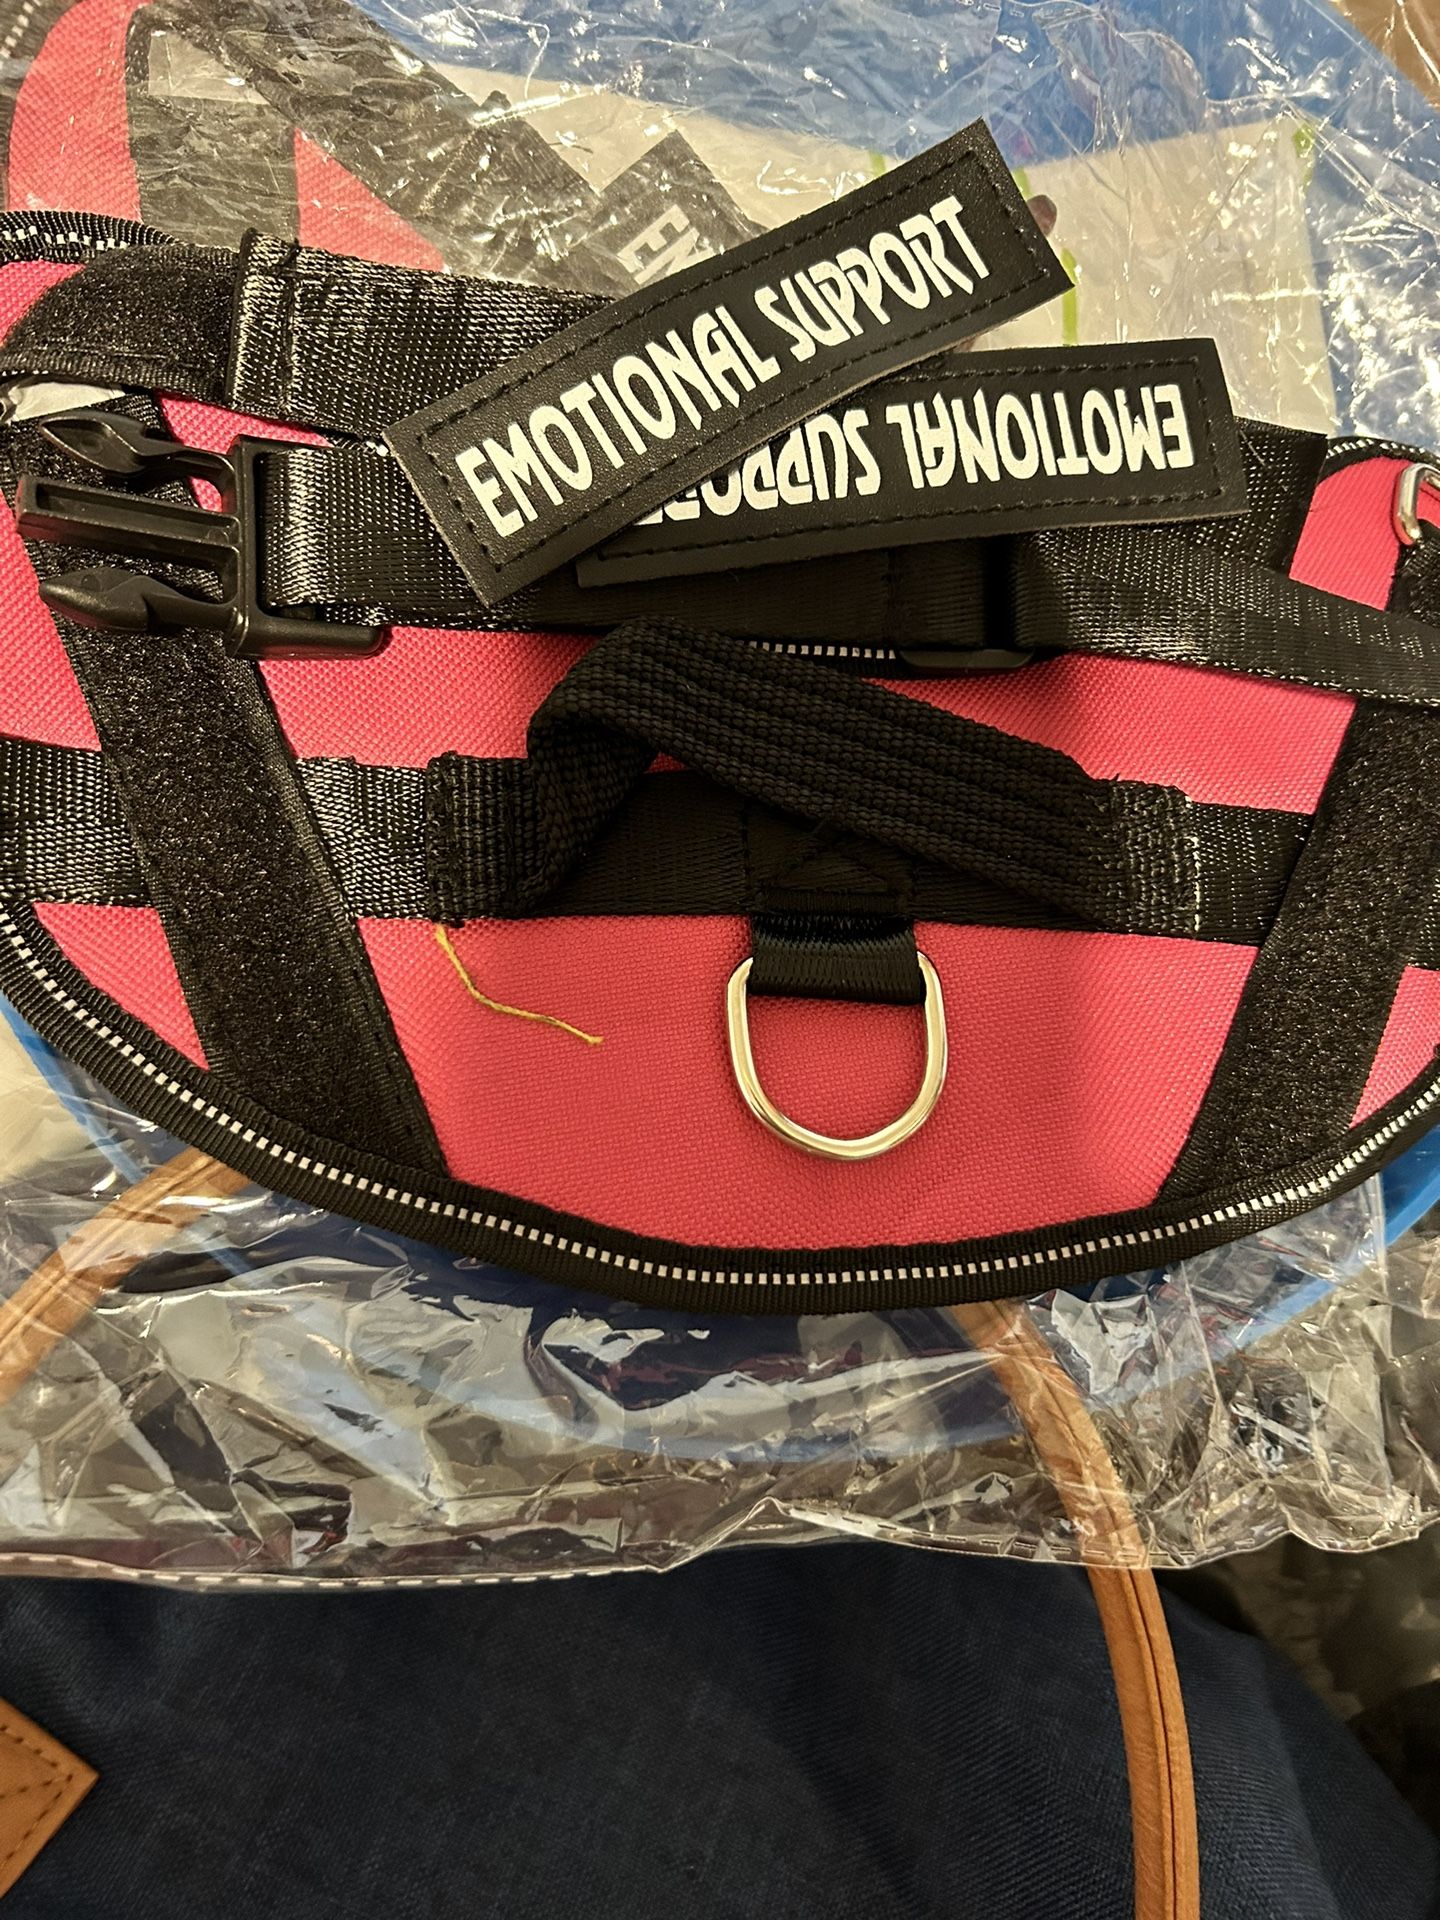 Emotional Support Harness 